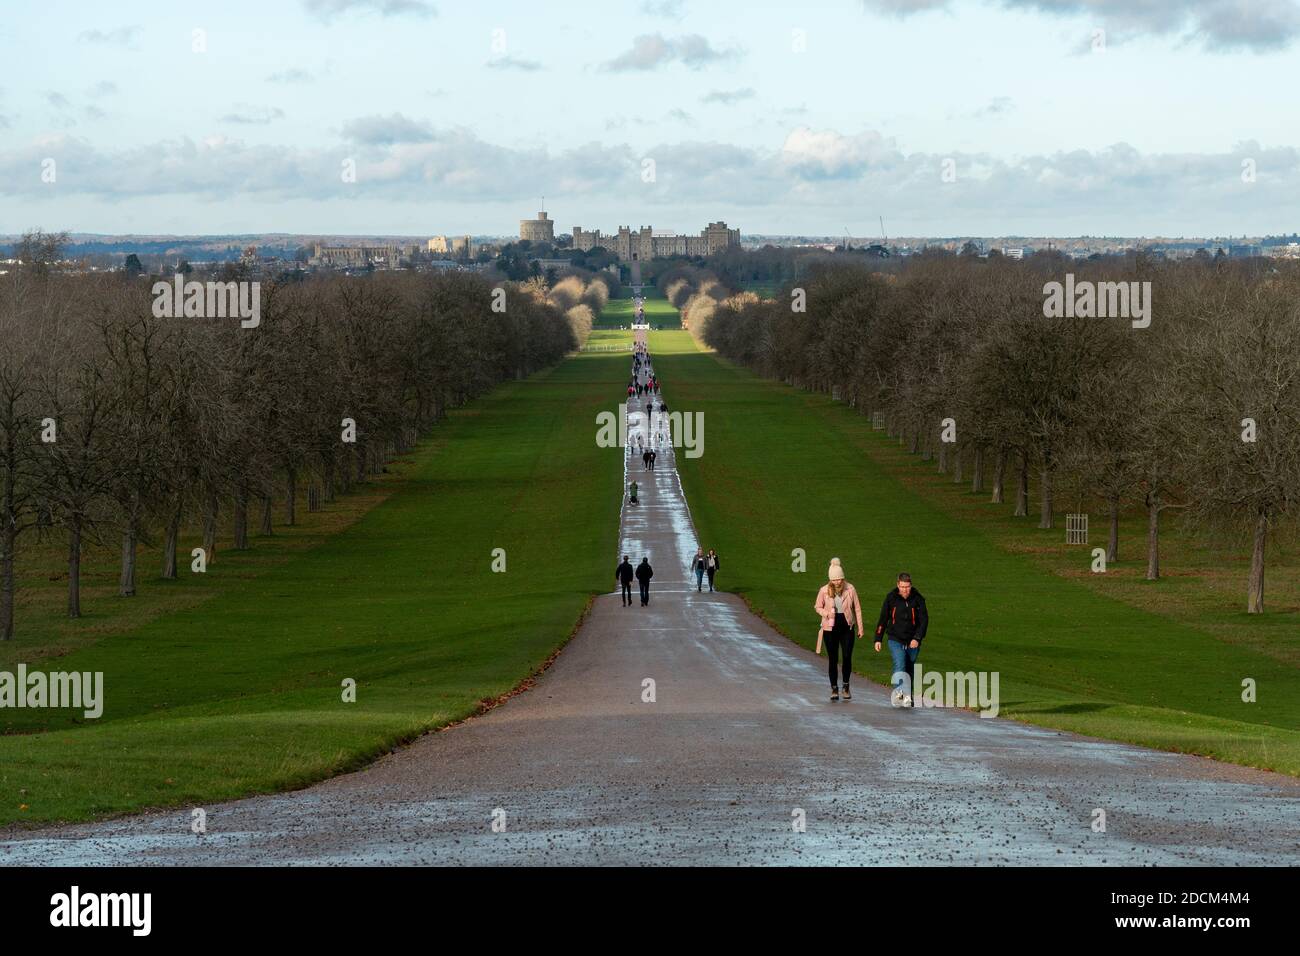 View of the Long Walk leading through Windsor Great Park to Windsor Castle with people walking in late autumn or November, UK Stock Photo